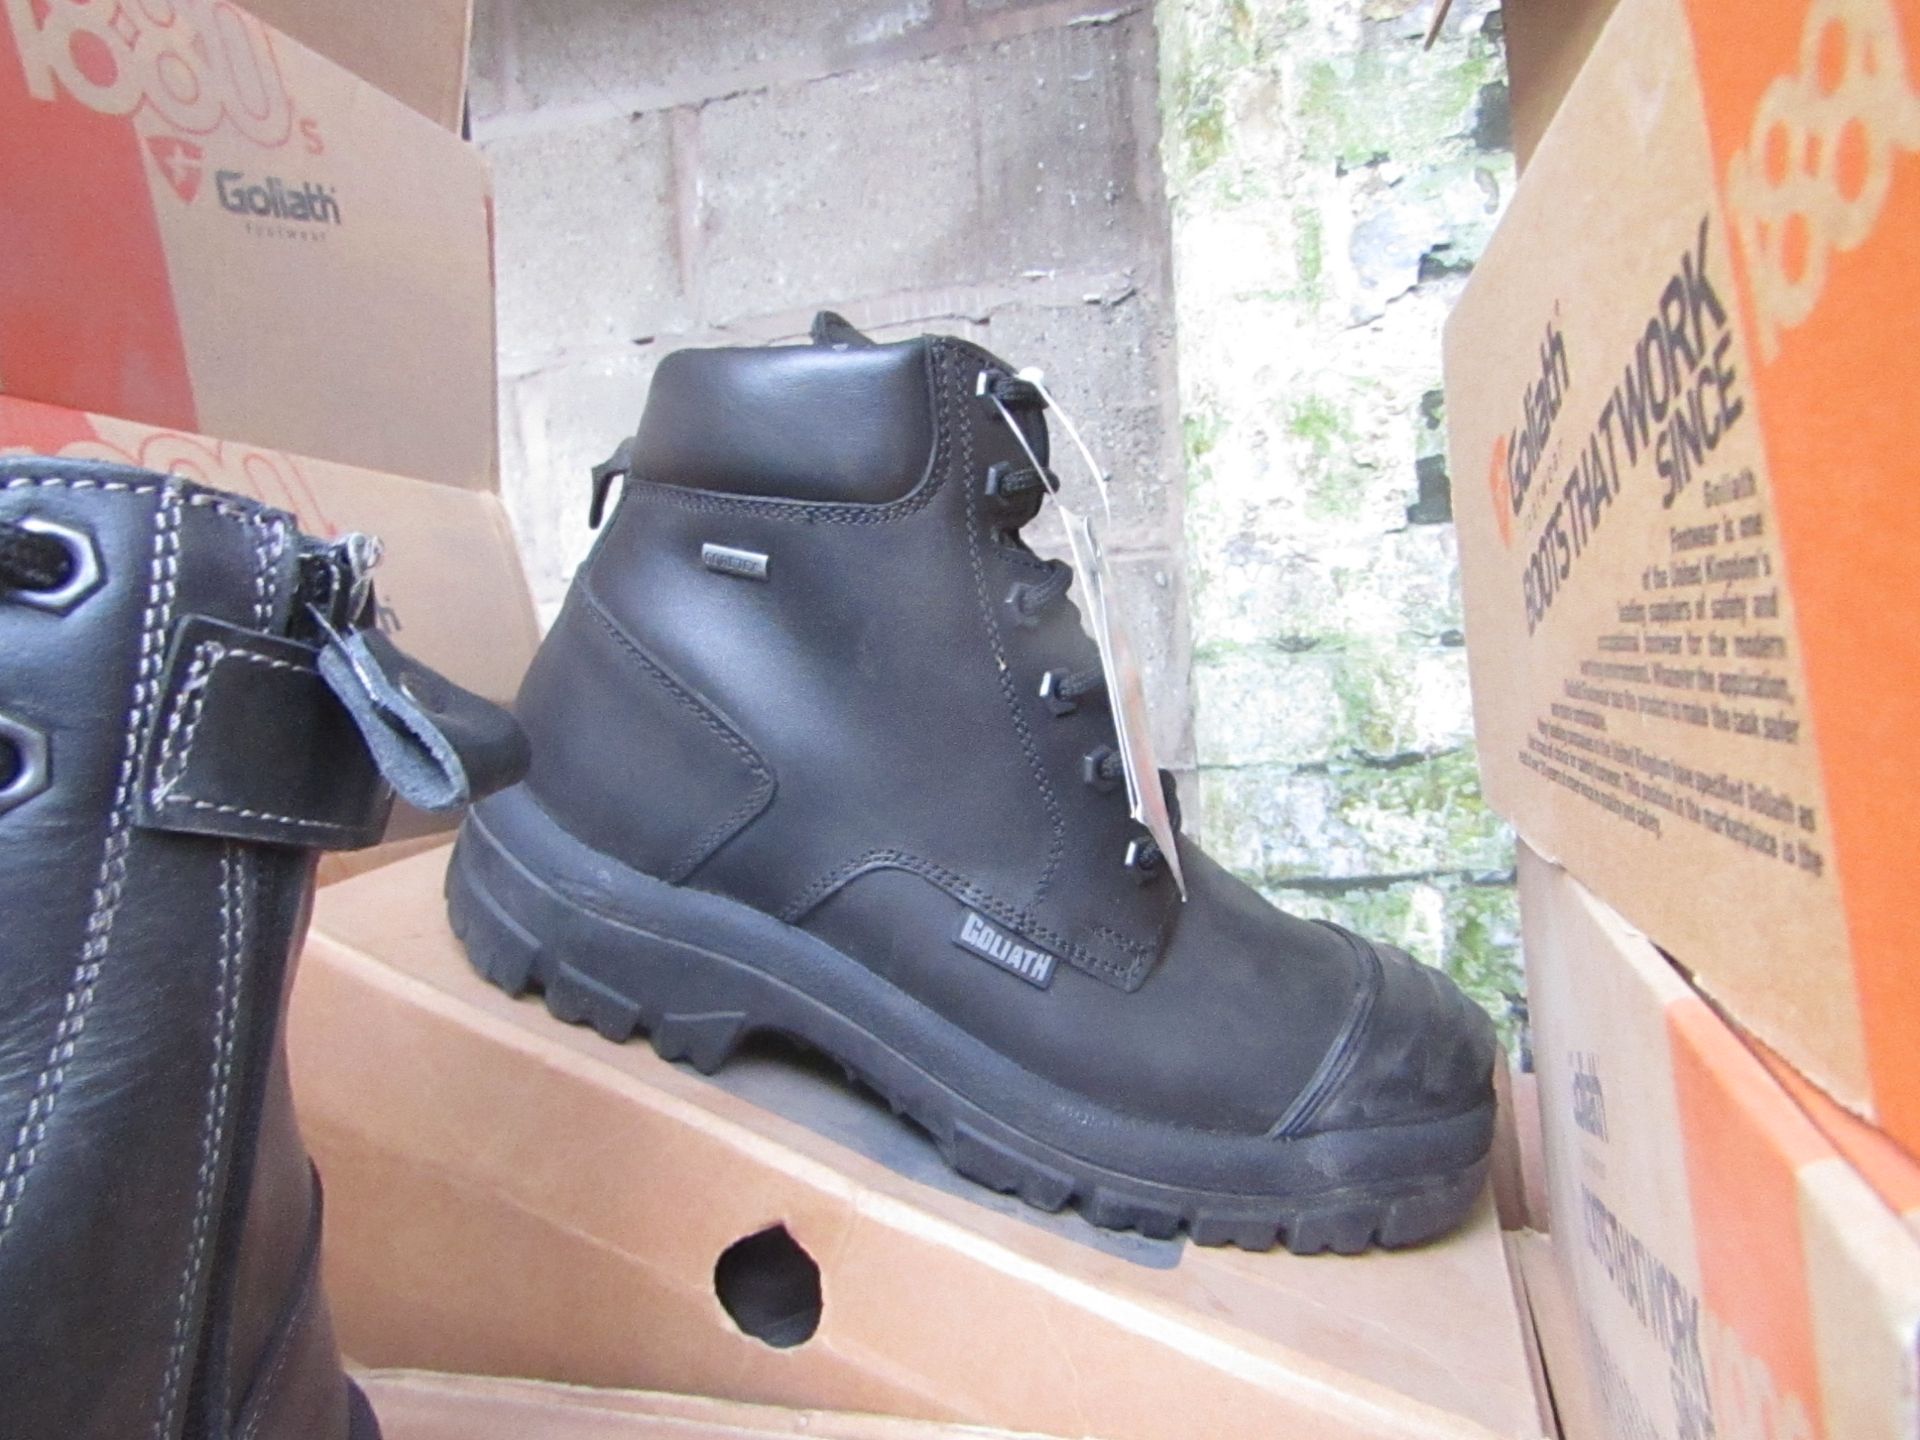 Goliath Centauras Goretex Black Steel Toe Cap Safety Ankle Boot new, Size 6 RRP £69.99